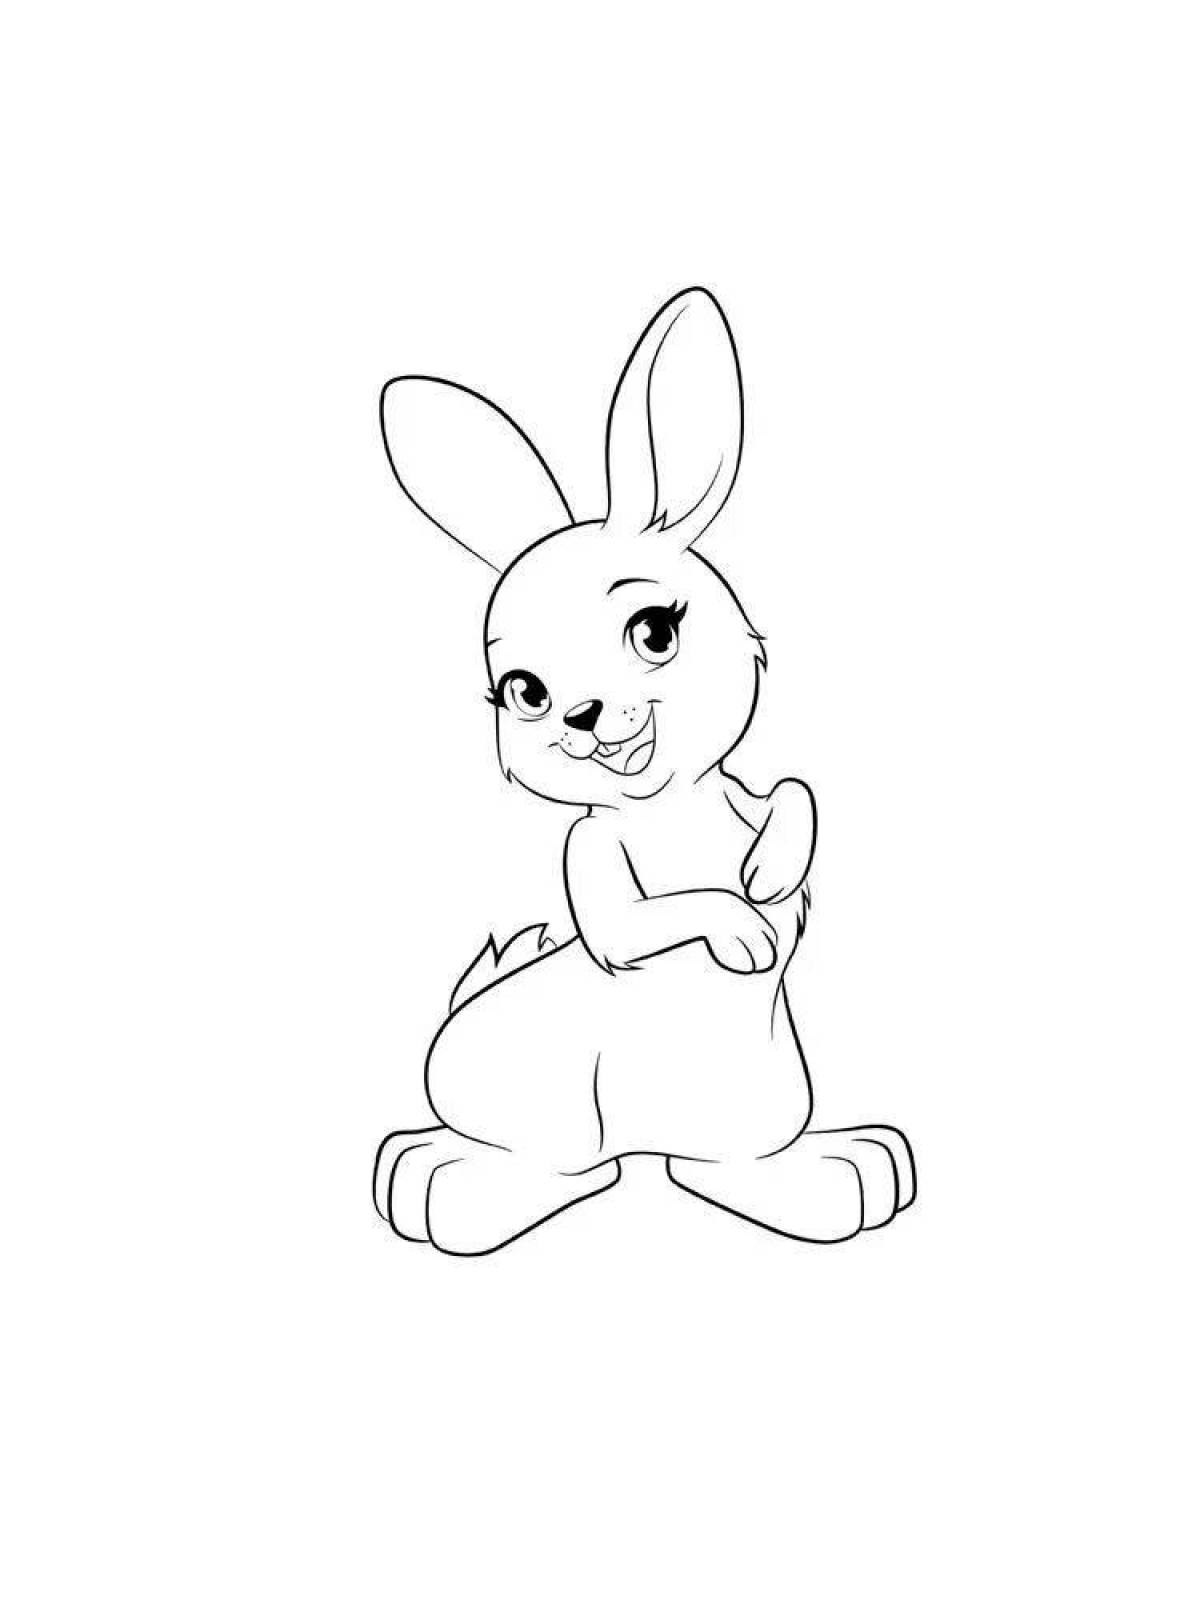 Coloring page dainty little rabbit